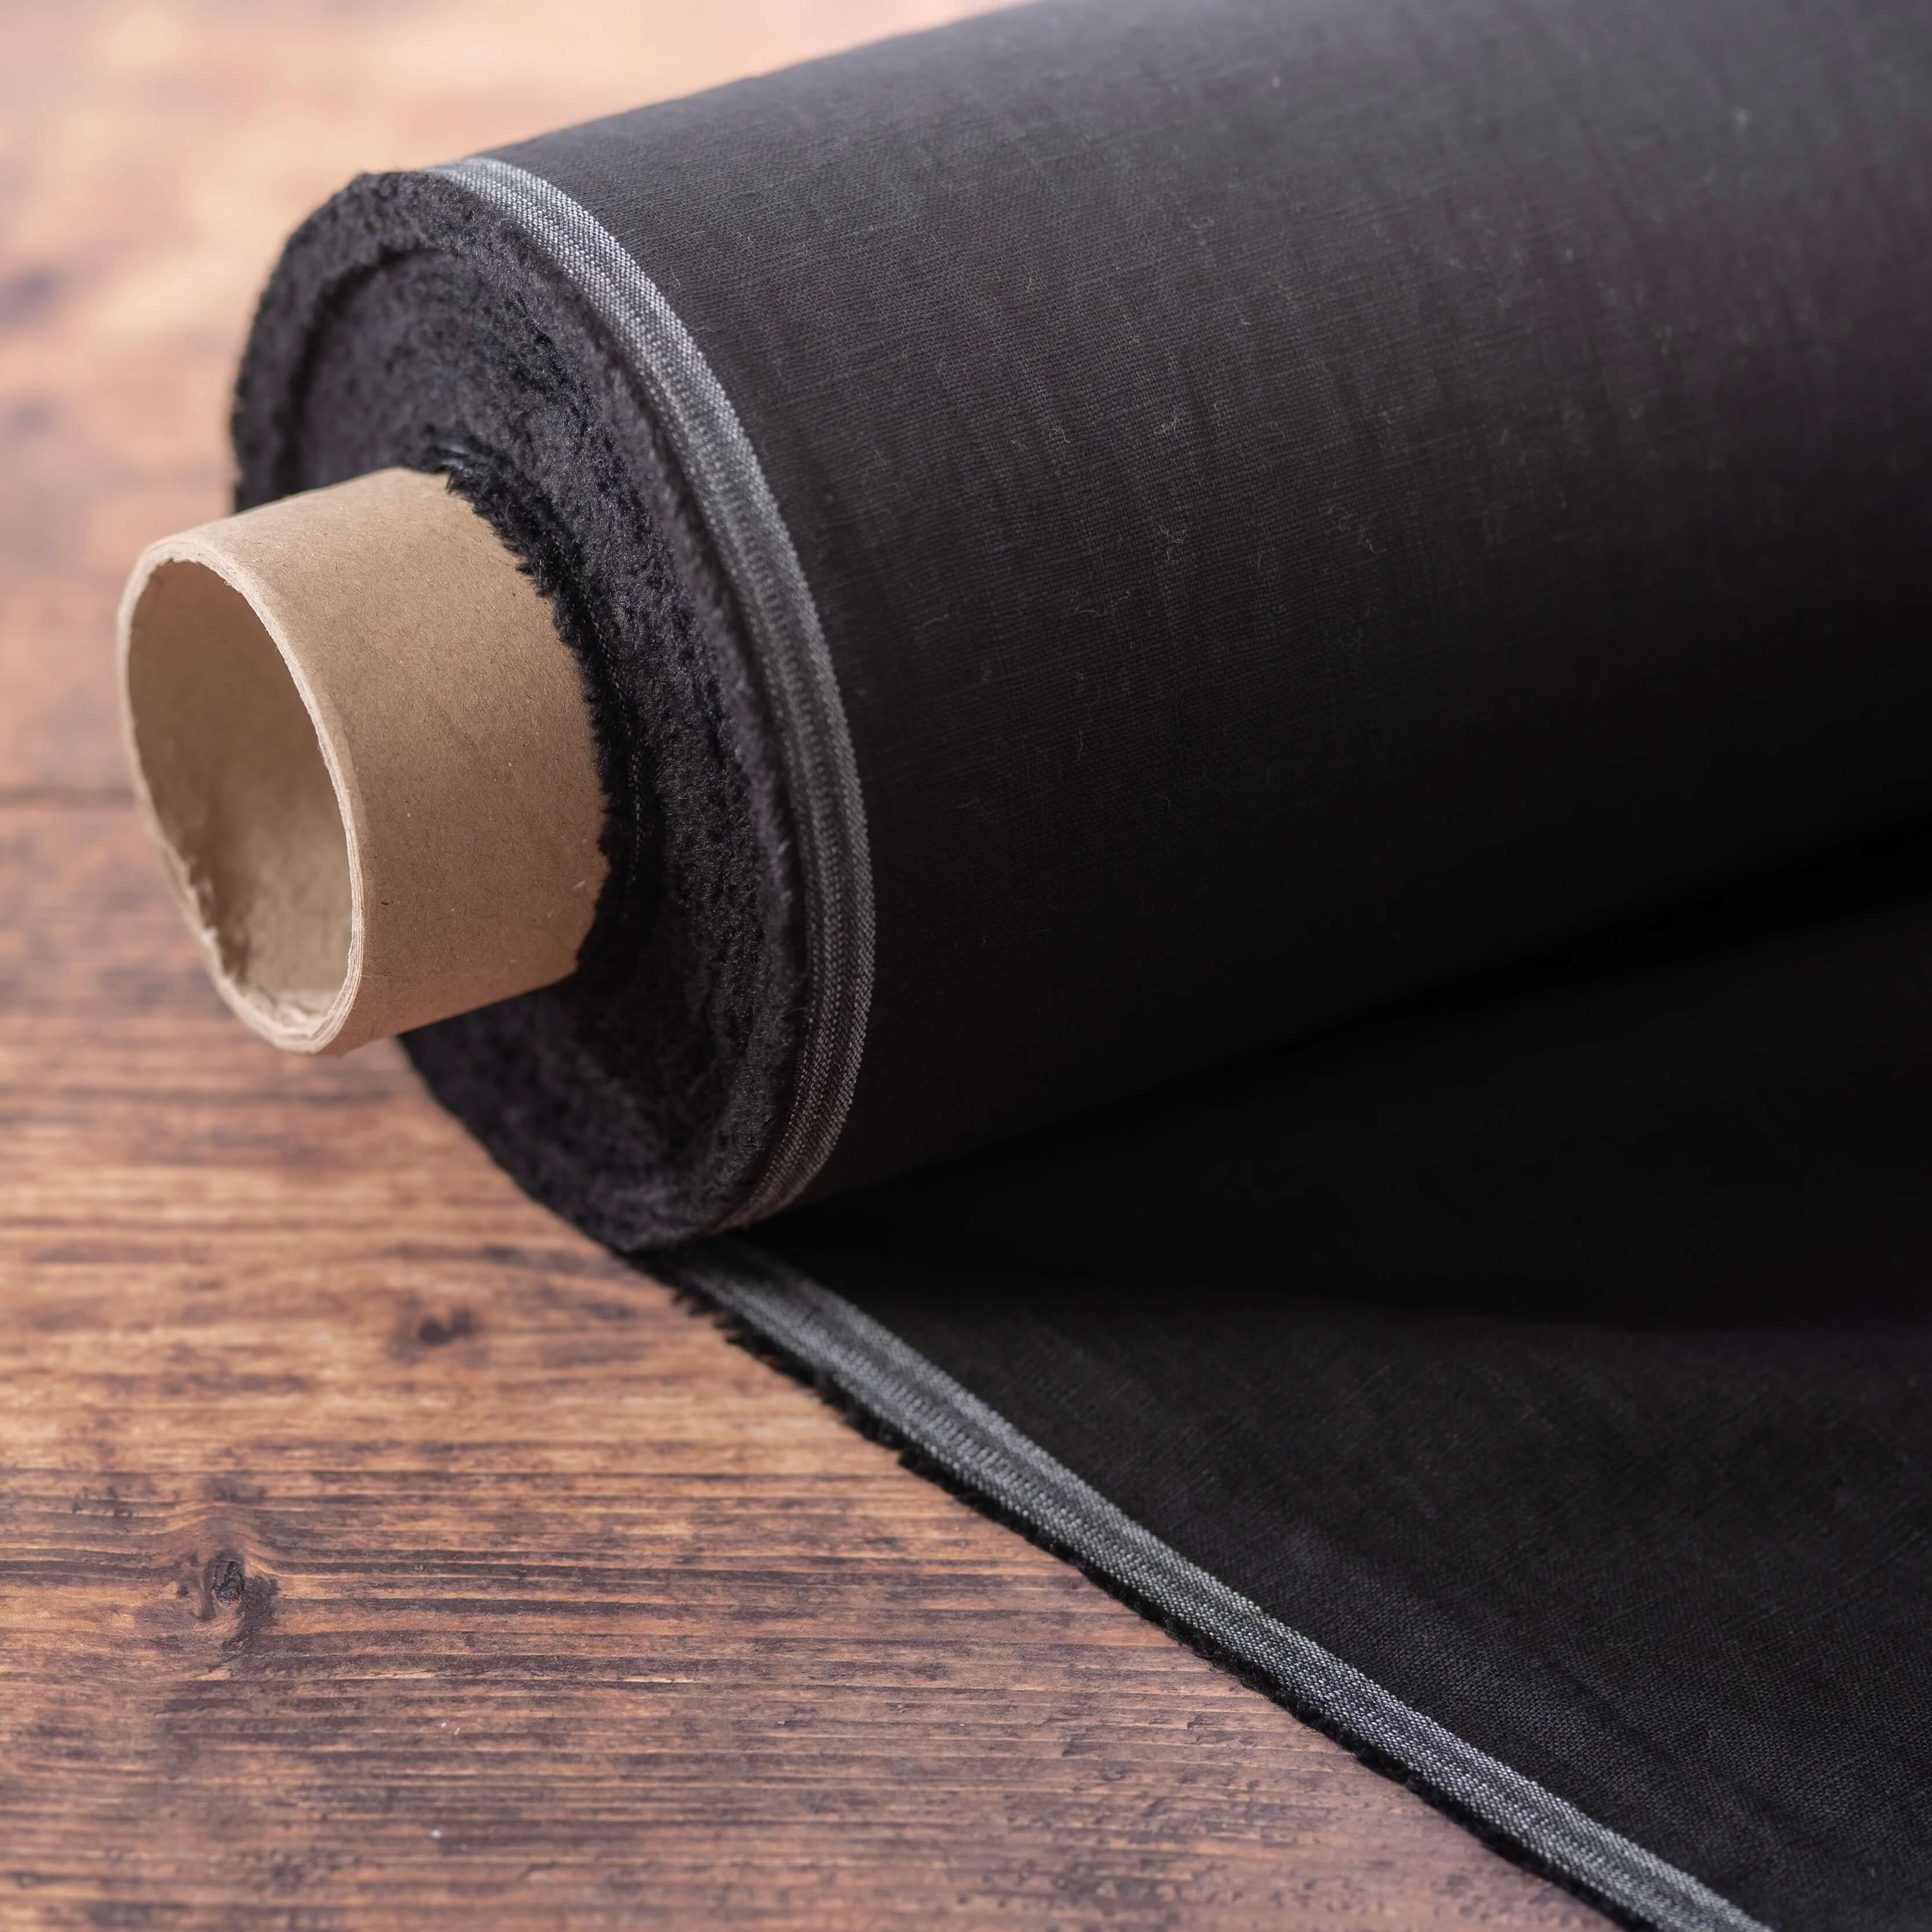 Roll of black linen fabric on wooden table